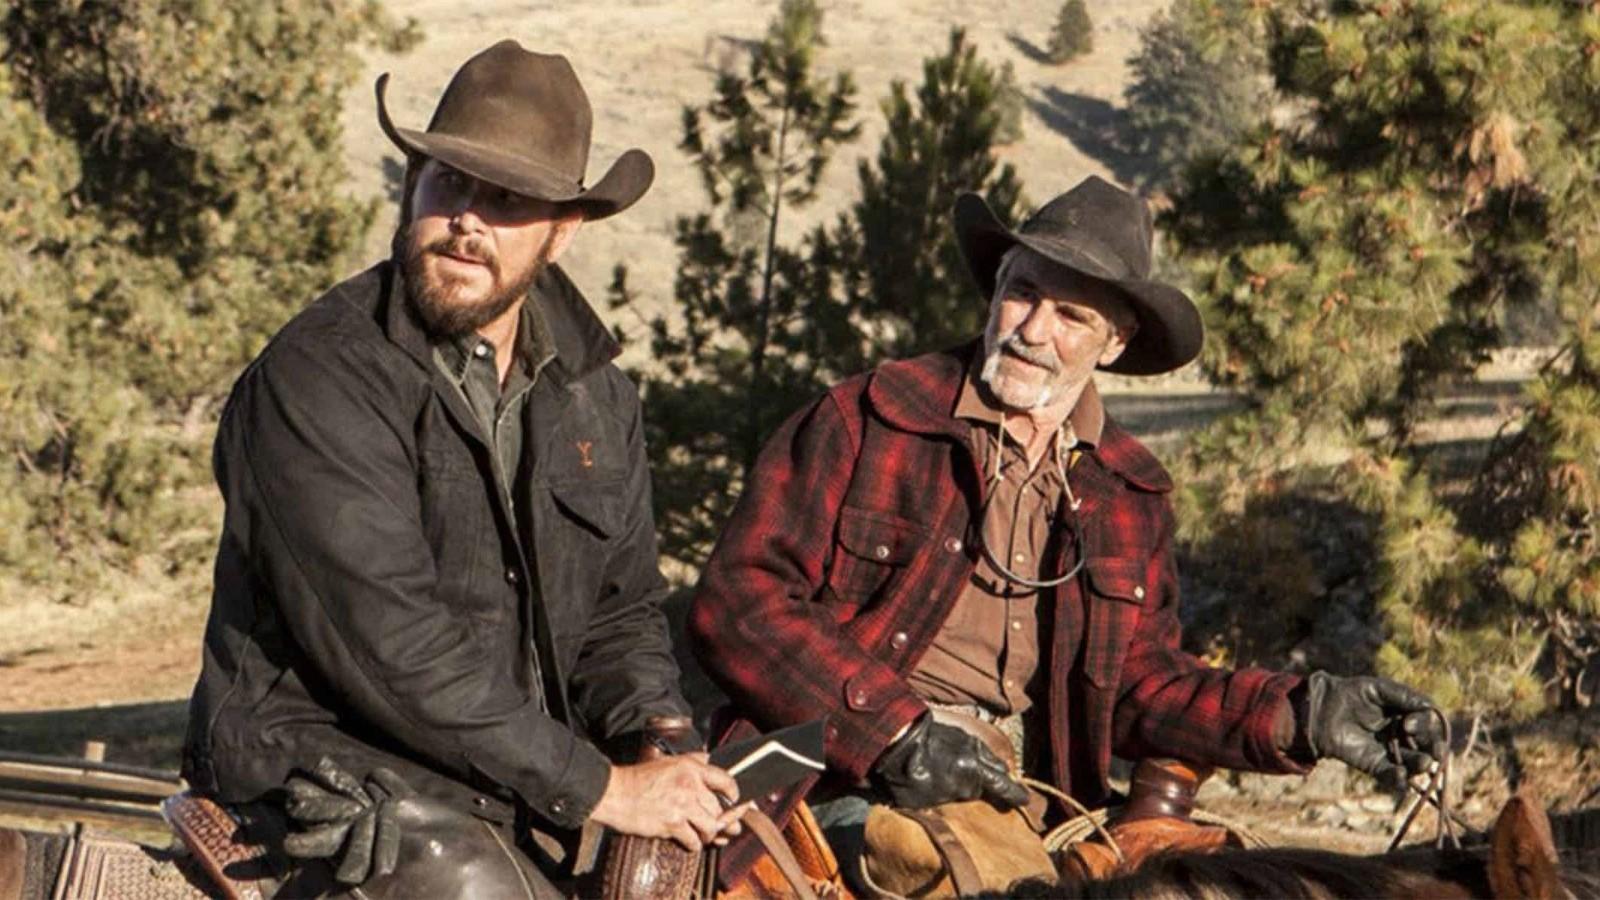 Cole Hauser as Rip and Forrie J. Smith as Lloyd on Yellowstone, sitting on horses and looking to the side